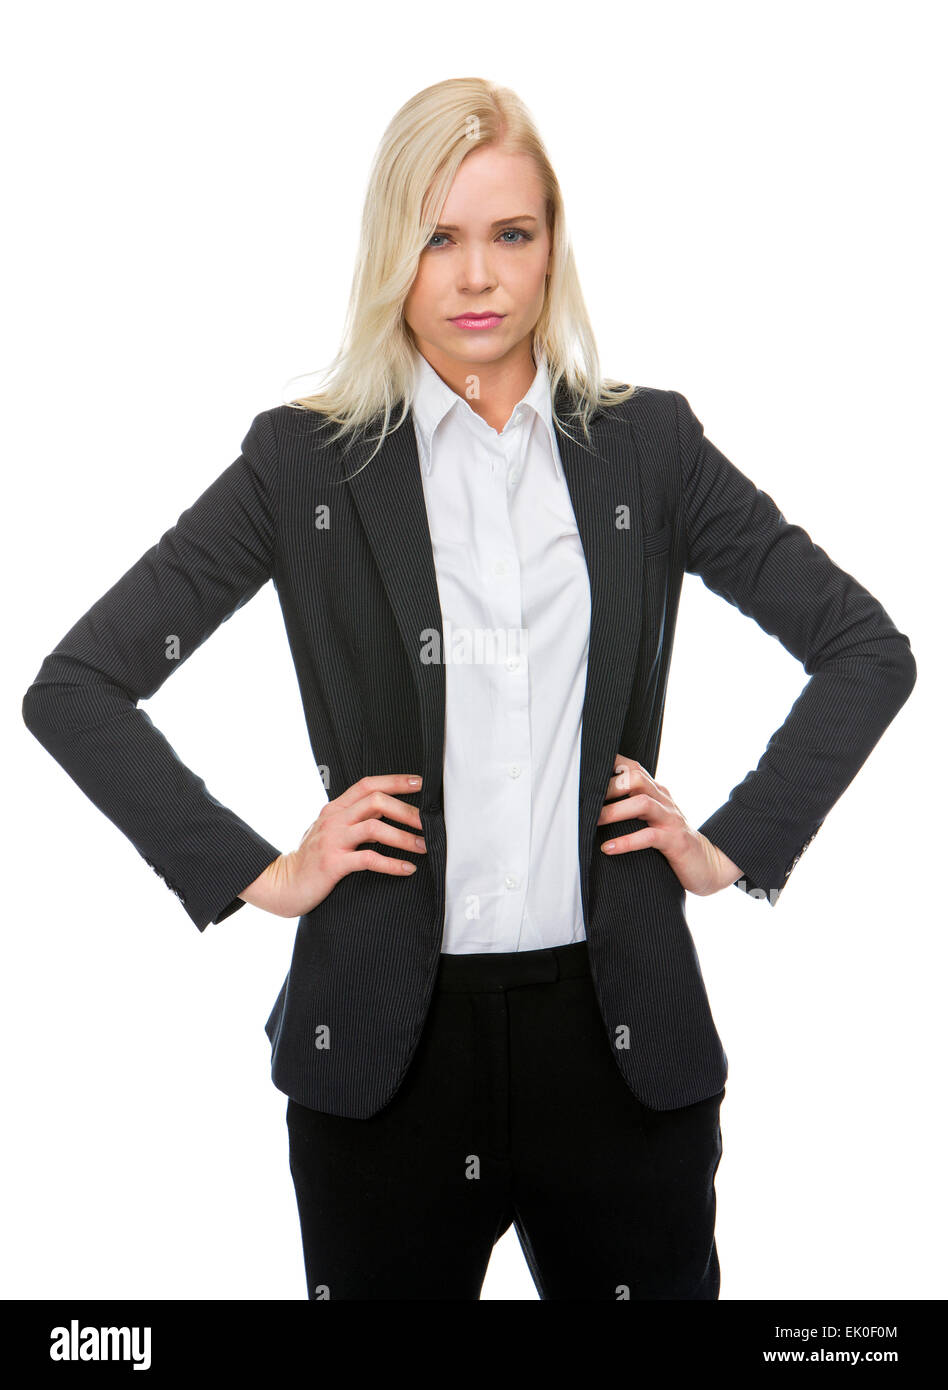 serious blonde businesswoman with arms resting on hips Stock Photo